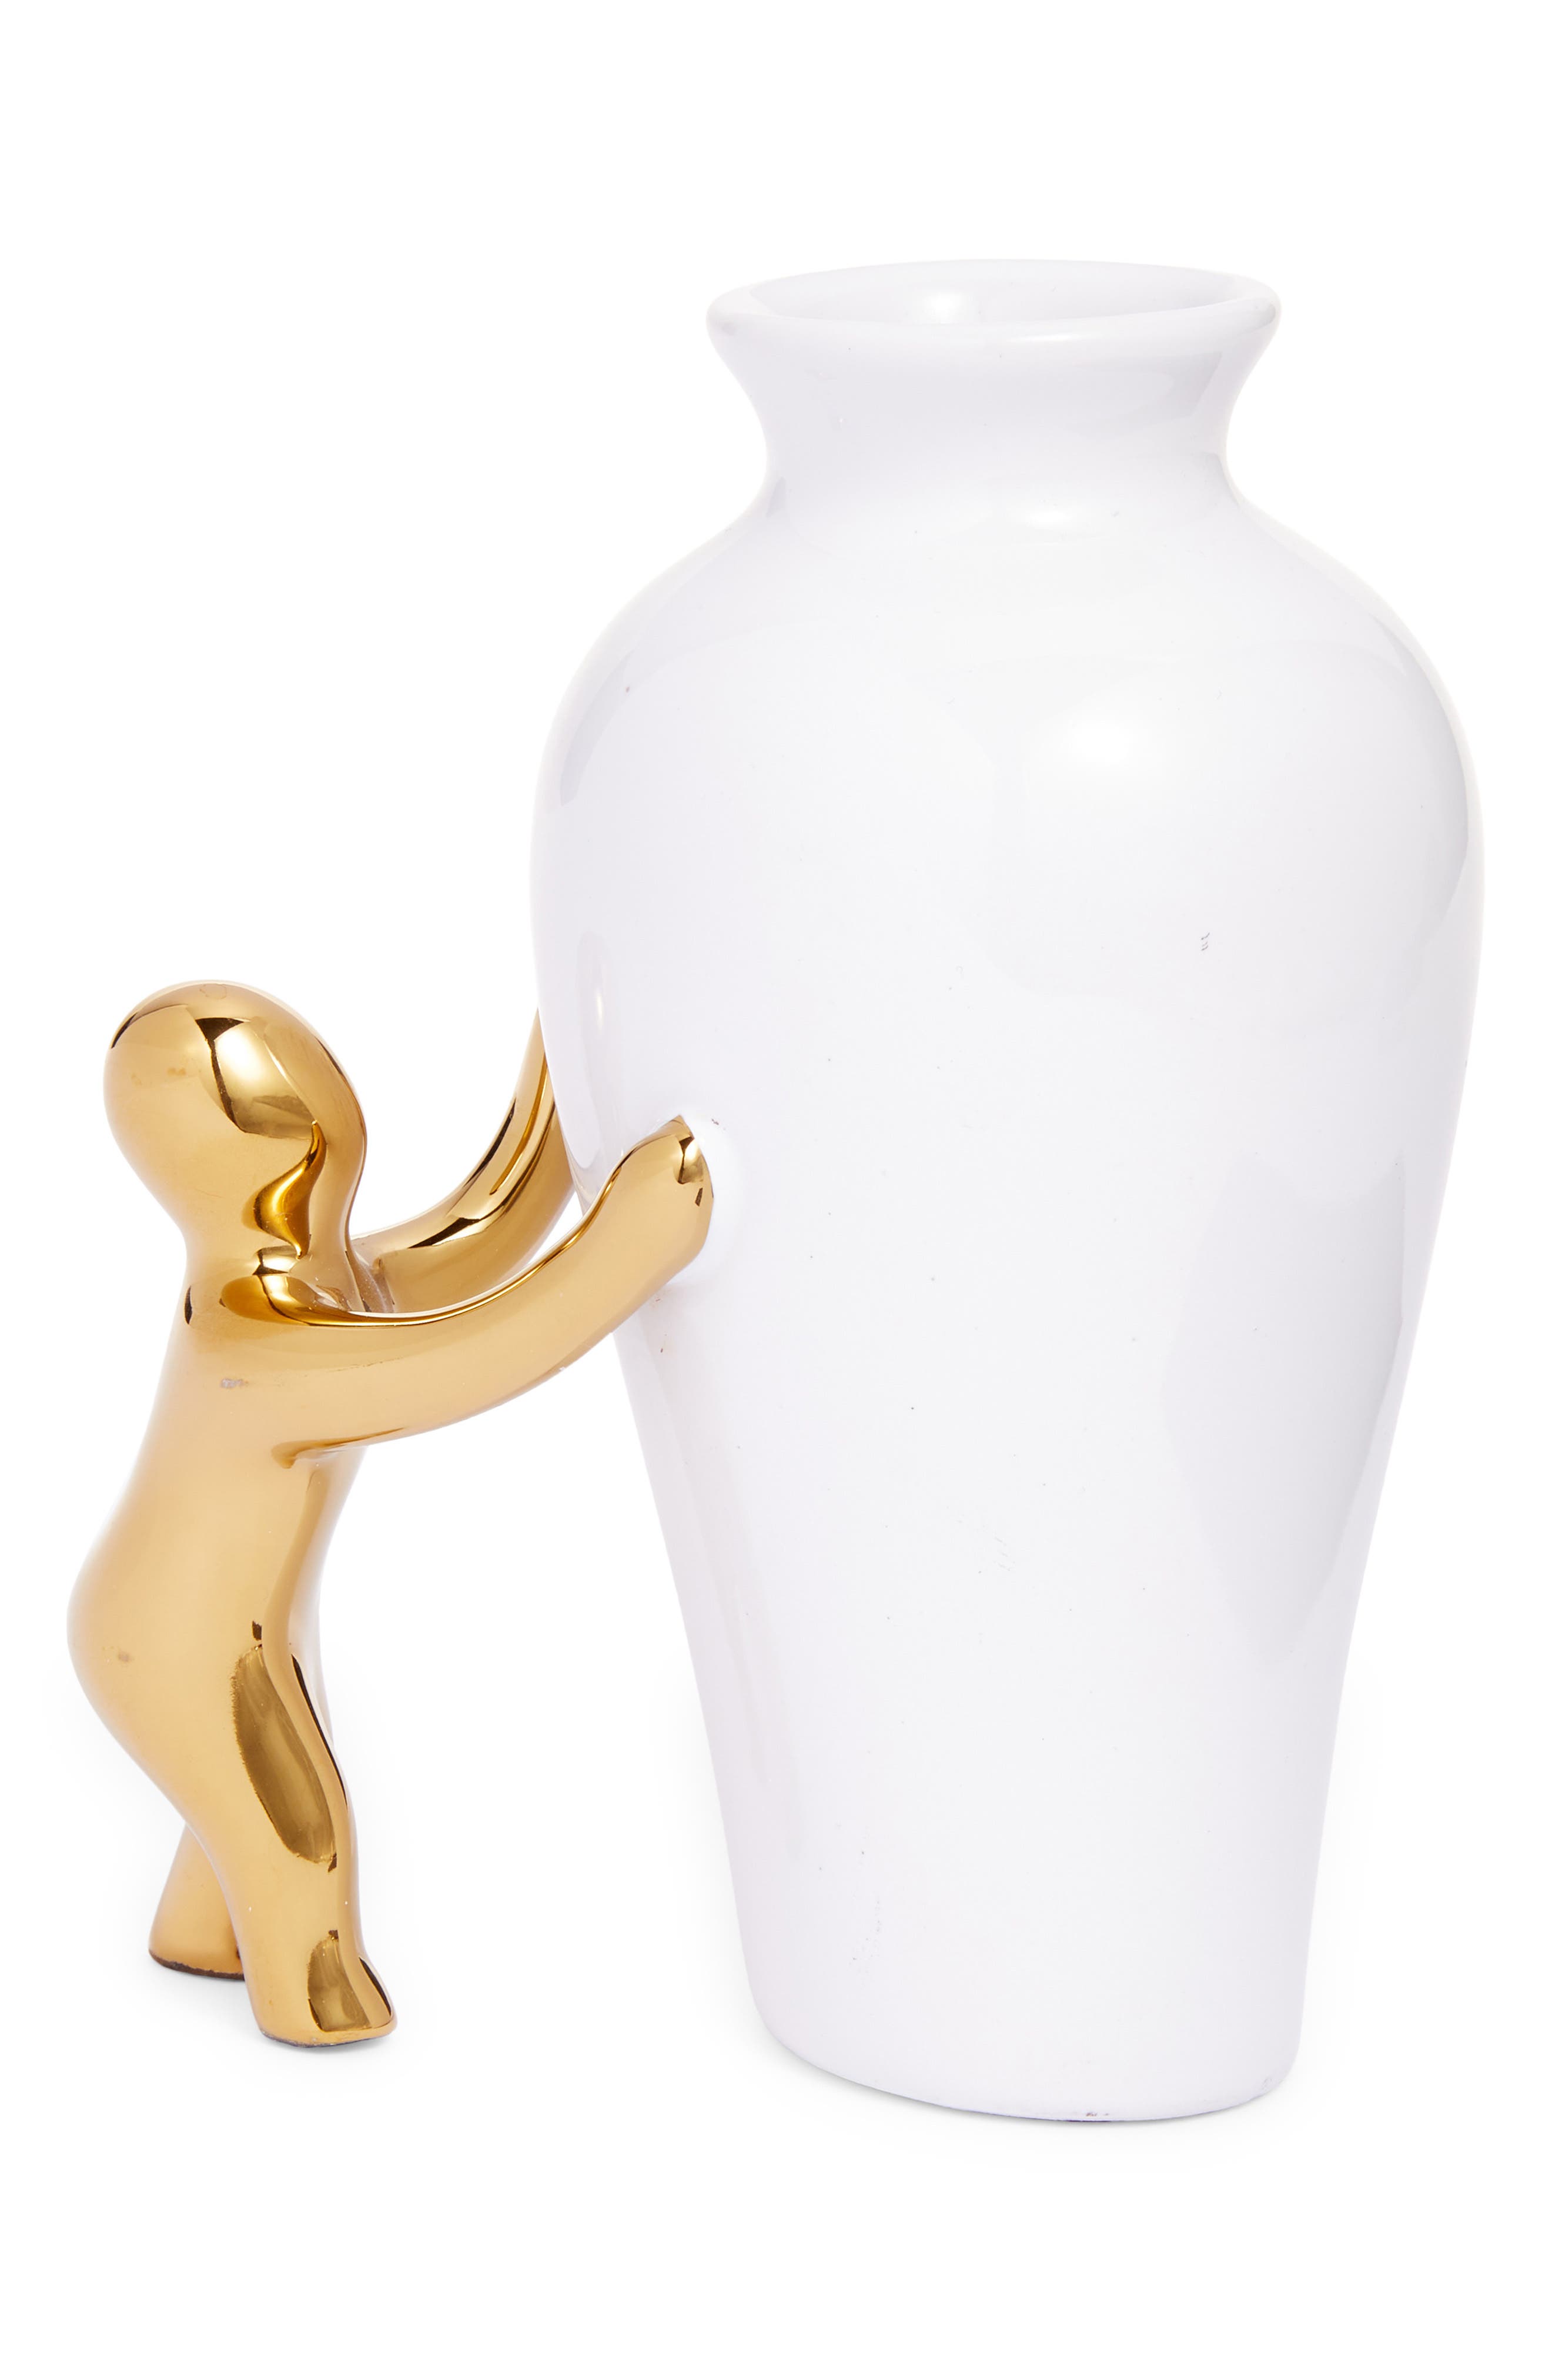 Made By Humans Little Guy Vase in Gold/White